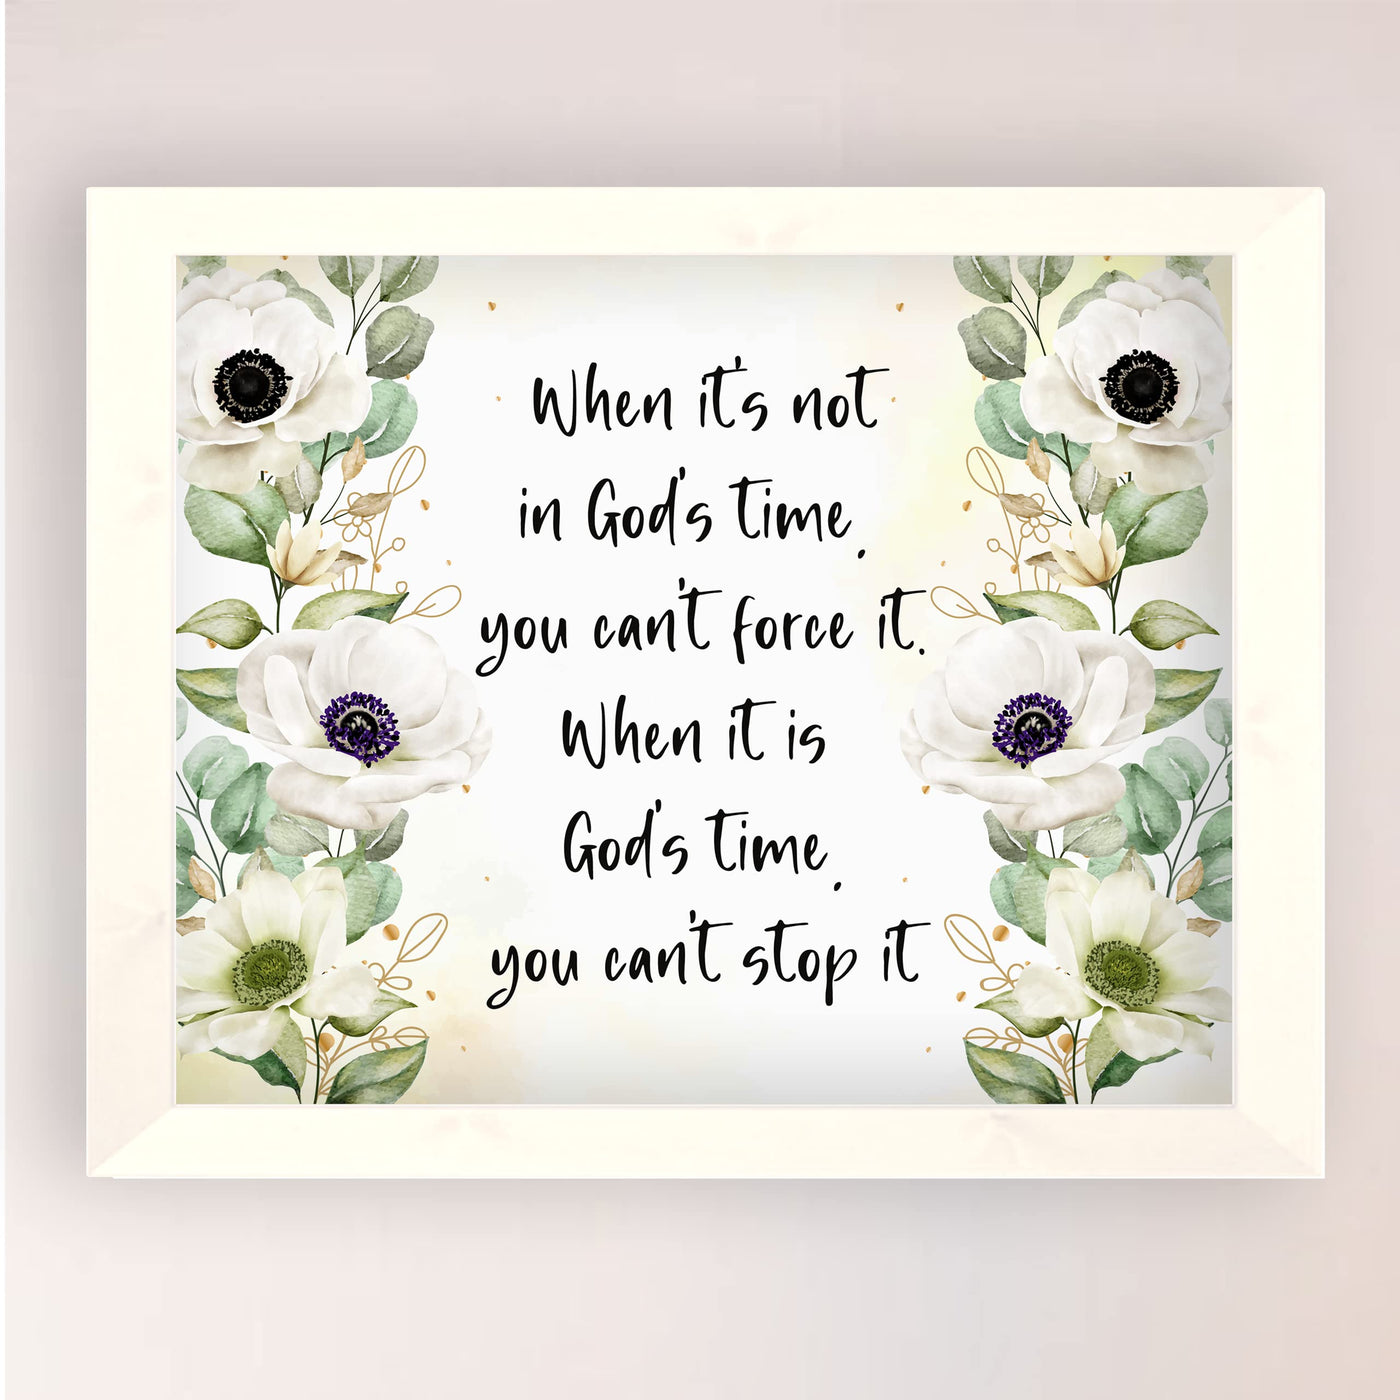 When It's God's Time, Can't Stop It Inspirational Christian Wall Decor -10x8" Rustic Floral Design Print -Ready to Frame. Religious Wall Art for Home-Office-Church Decorations. Great Gift of Faith!